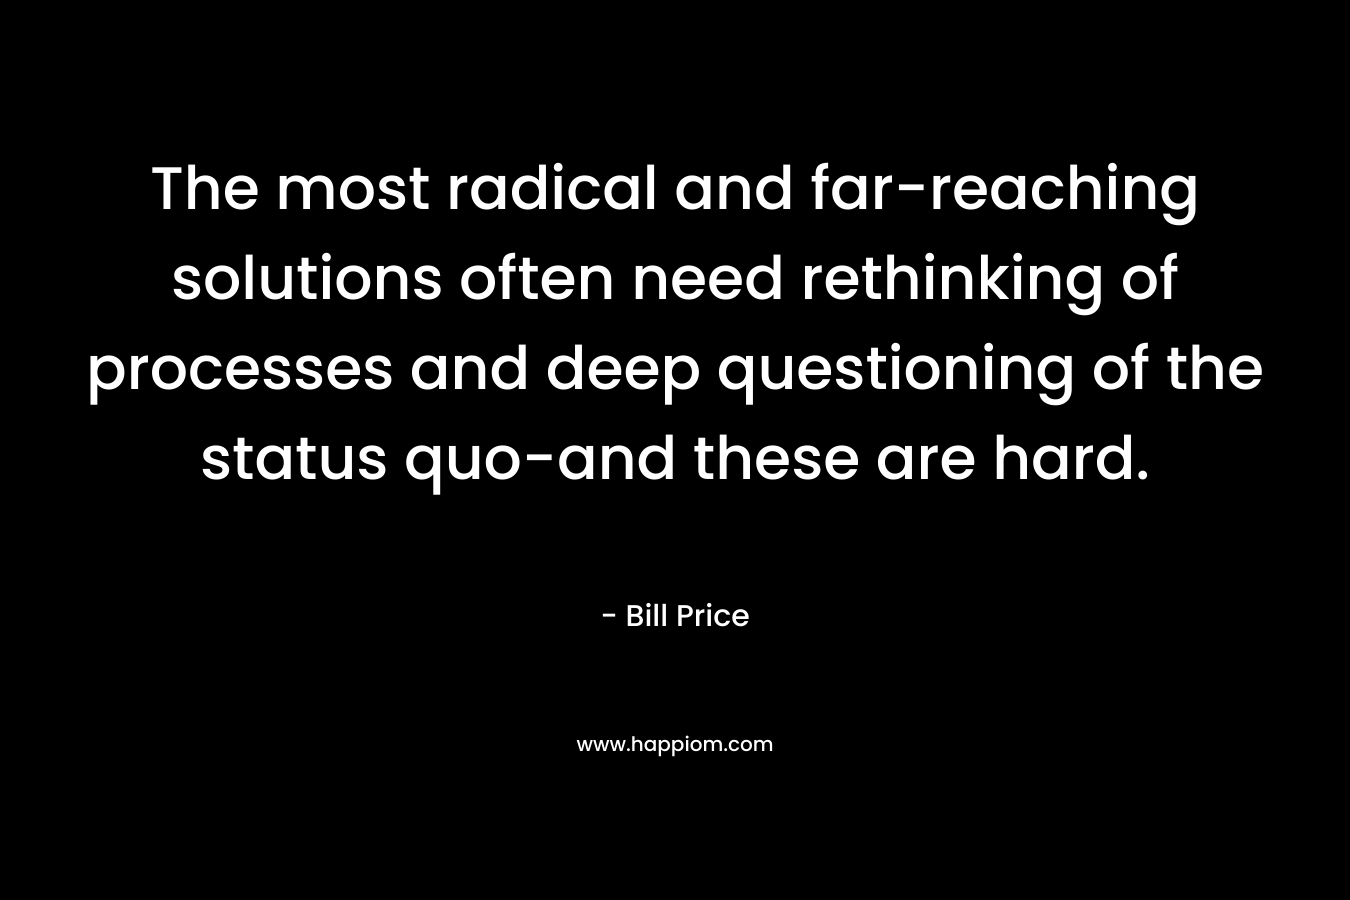 The most radical and far-reaching solutions often need rethinking of processes and deep questioning of the status quo-and these are hard. – Bill Price